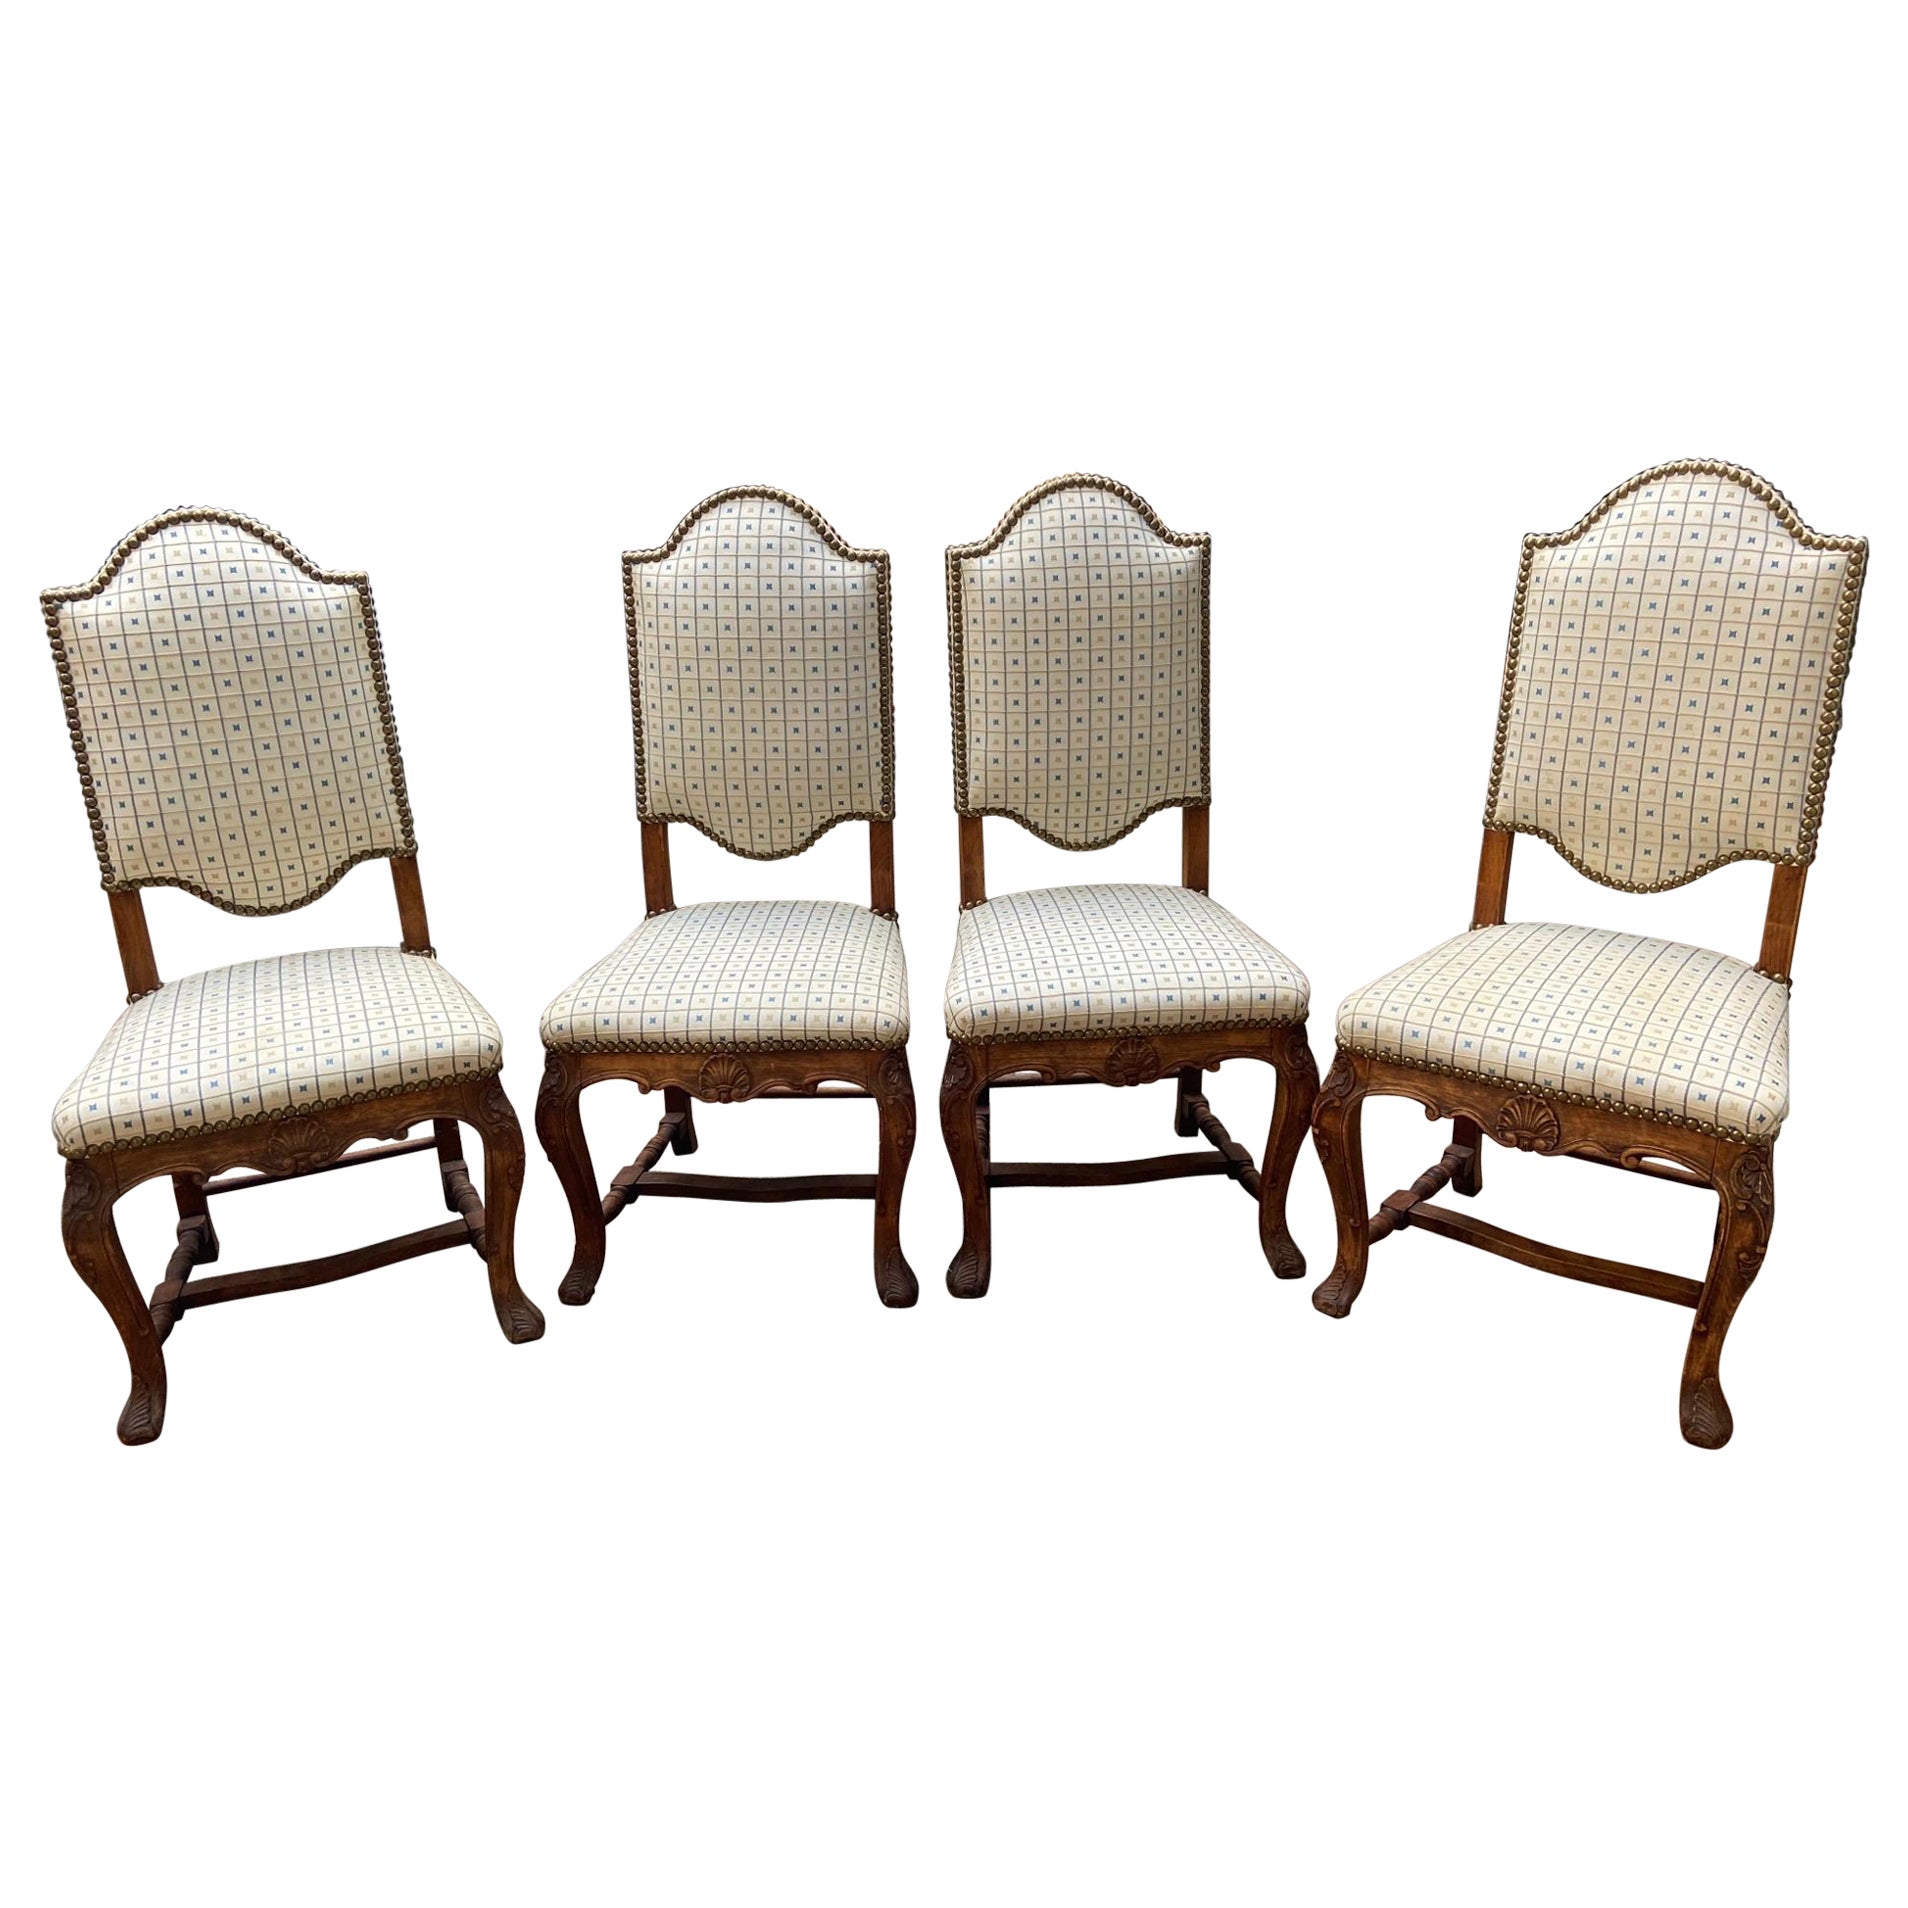 Set of 4 Louis XV Style Chairs, Pierre Frey Fabric, 19th Century